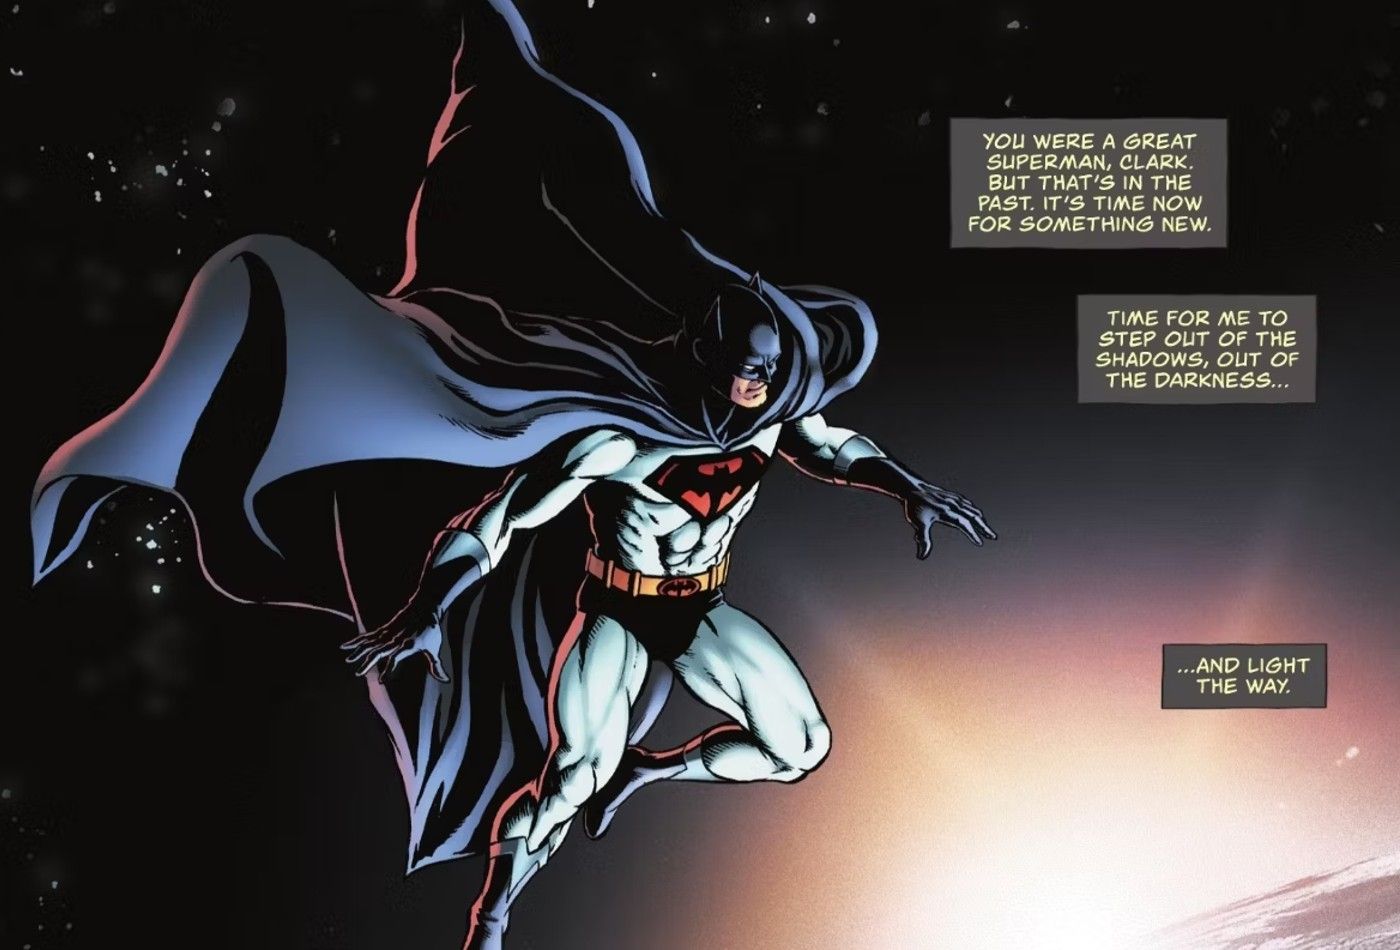 Comic book panel: Batman flying in space in a Superman-inspired costume.